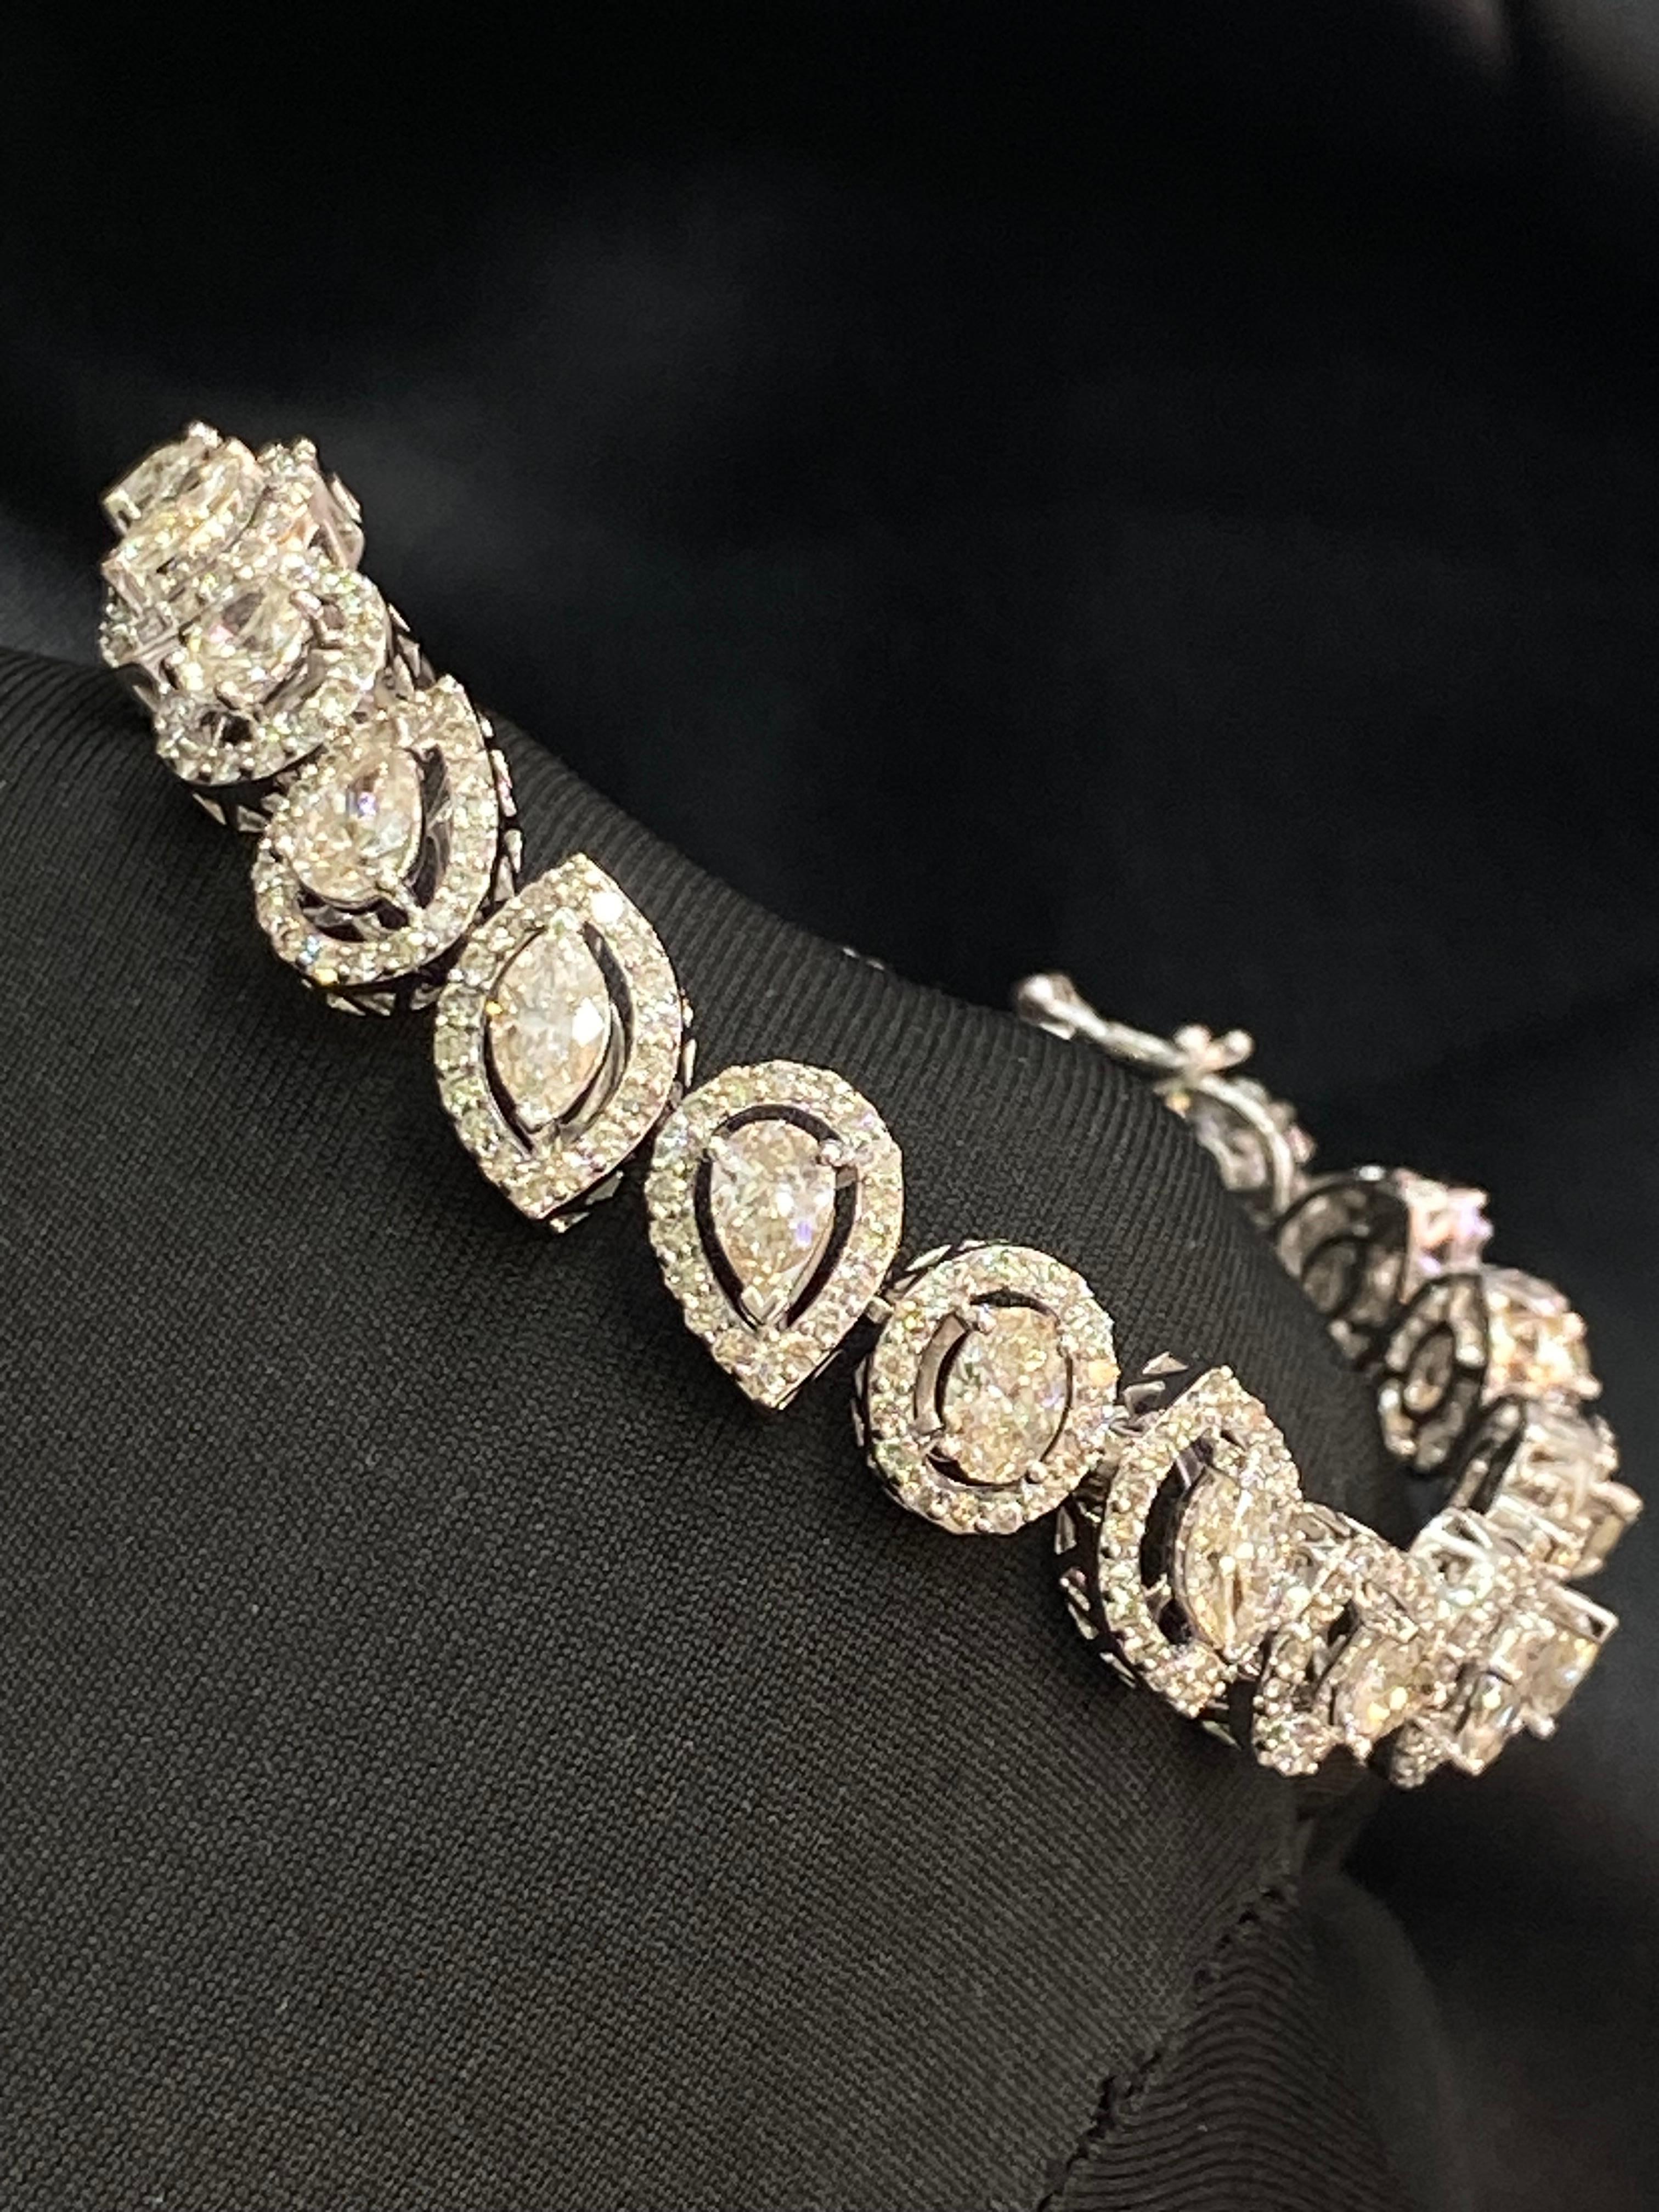 This exquisite bracelet showcases a total of 12.28 carats of pear, marquise, oval, heart, and round-shaped diamonds. Among them are 21 pieces of single pointers totaling 6.30 carats (each diamond weighing 0.30 carats), alongside 5.98 carats of side